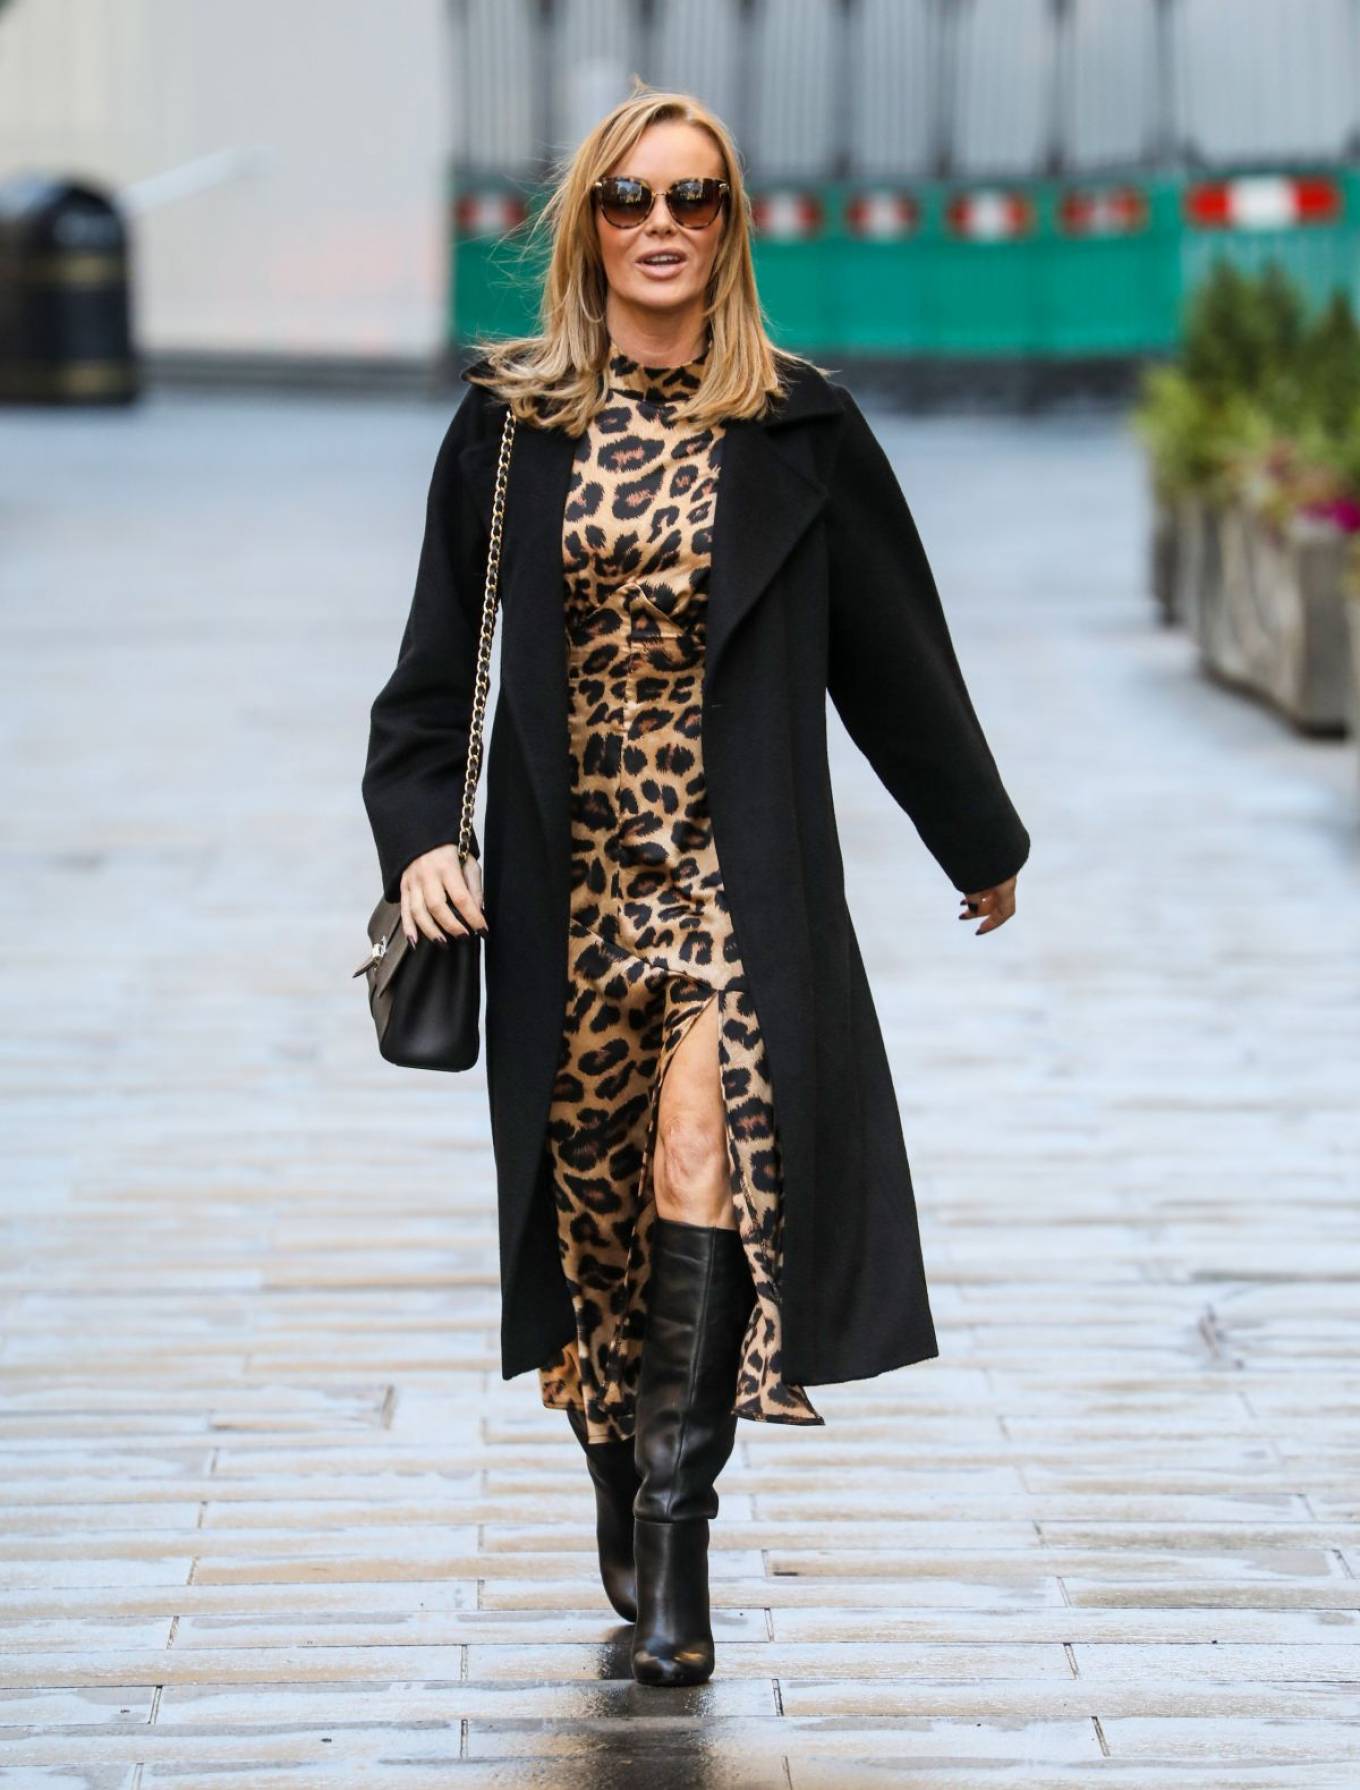 Amanda Holden 2020 : Amanda Holden – out and about in London -05